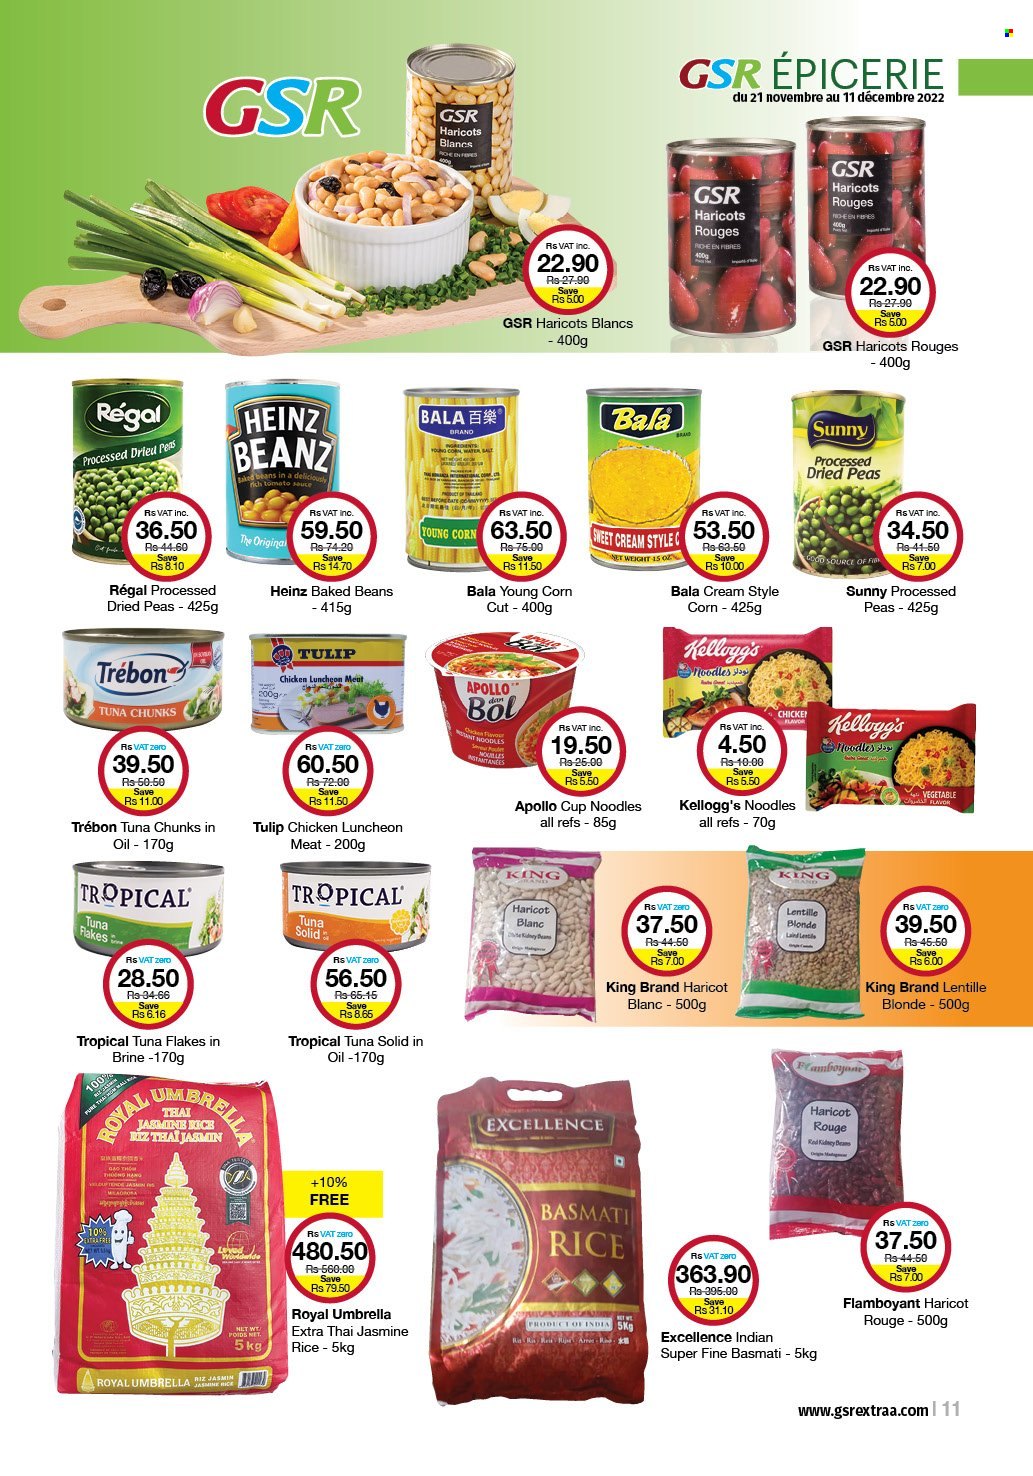 thumbnail - GSR Catalogue - 21.11.2022 - 11.12.2022 - Sales products - beans, peas, tuna, noodles cup, noodles, lunch meat, Kellogg's, kidney beans, baked beans, basmati rice, rice, jasmine rice, Heinz. Page 11.